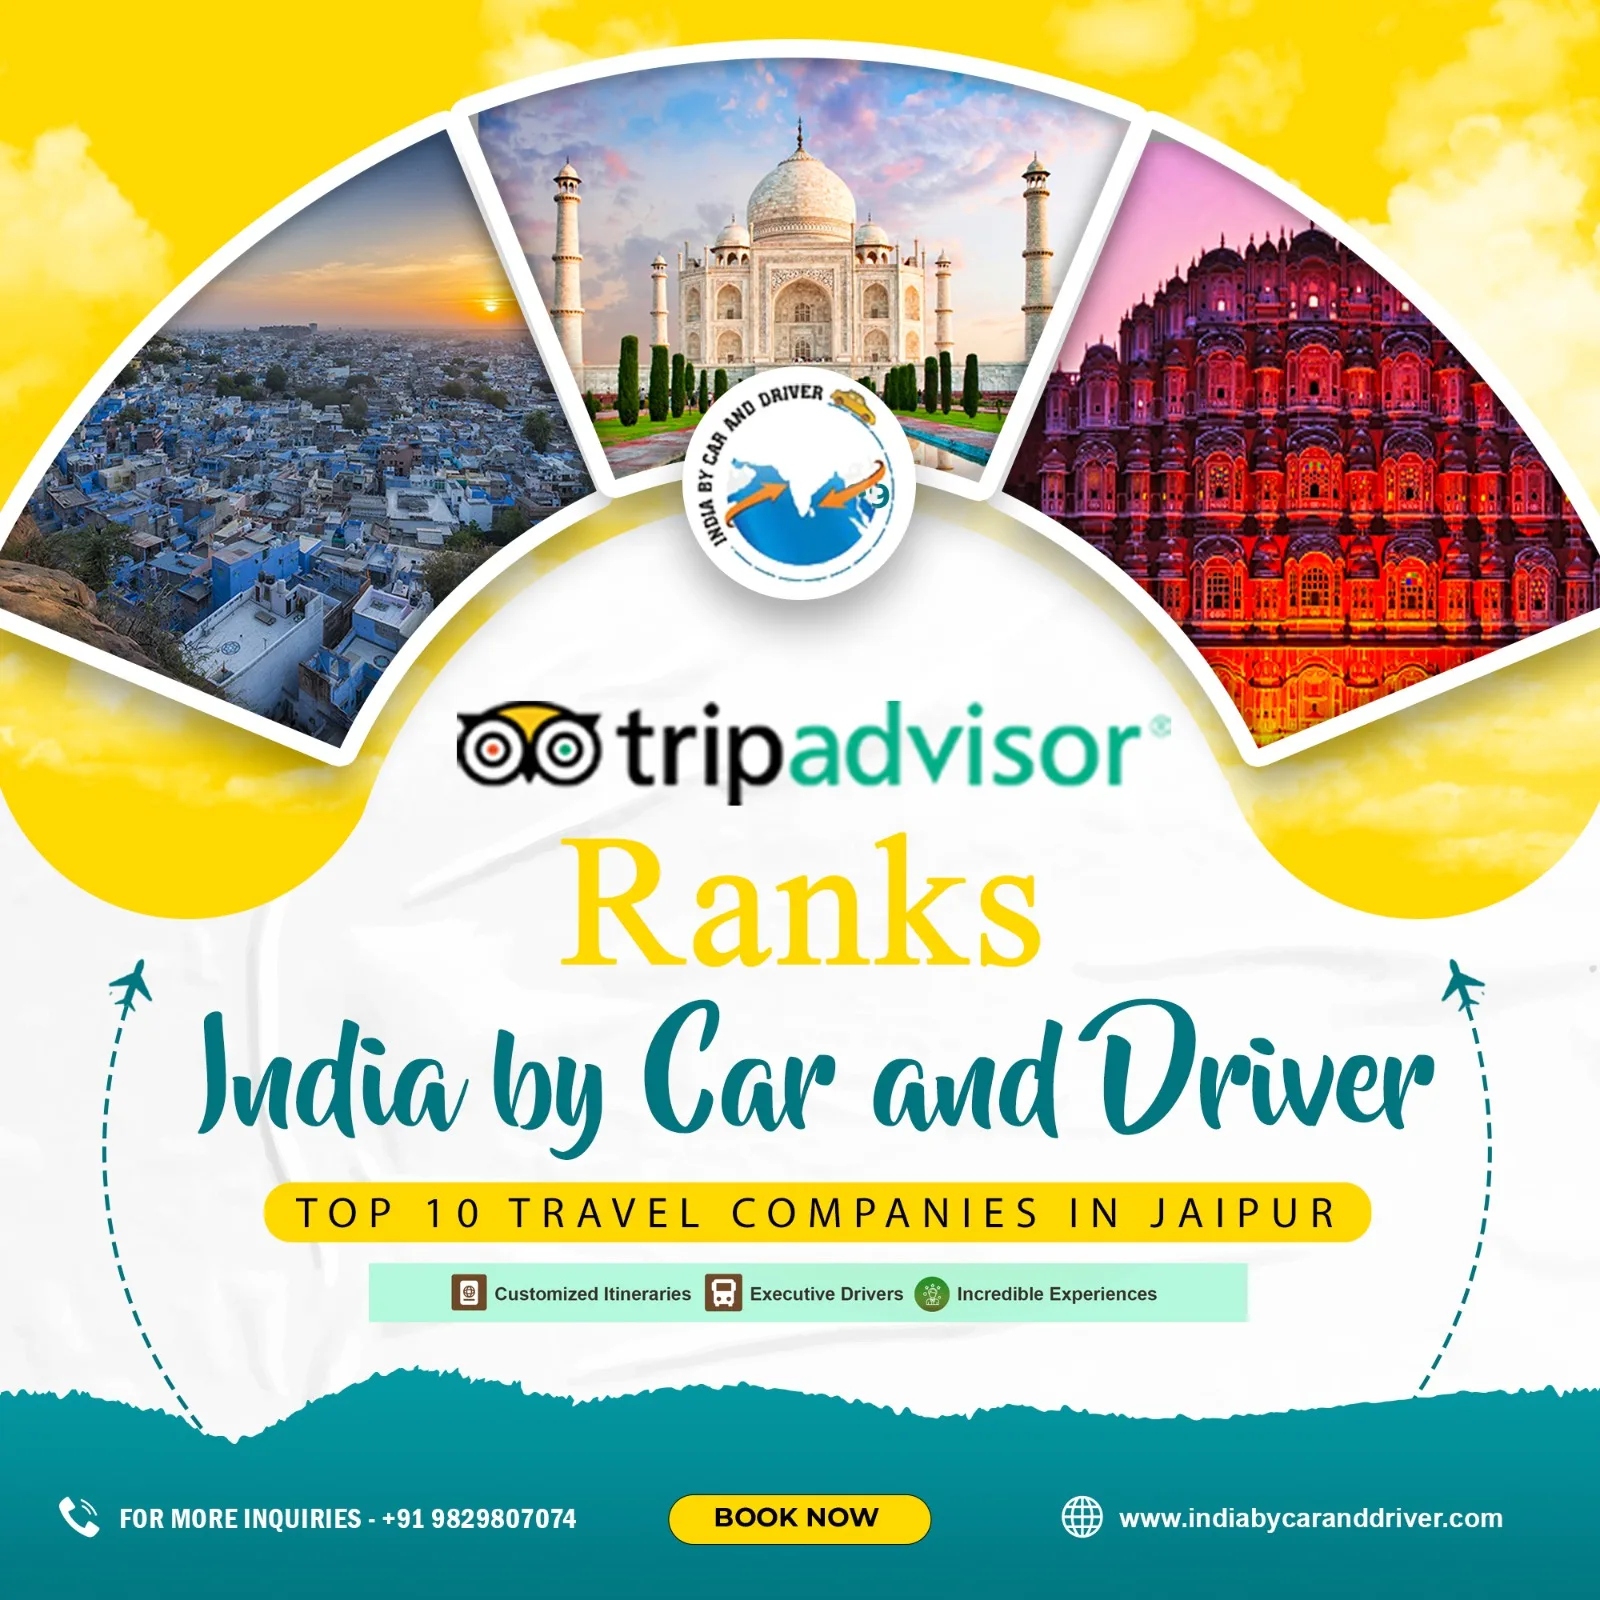 Tripadvisor Ranks India by Car & Driver in Top 10 Tours and Travels Company Jaipur India